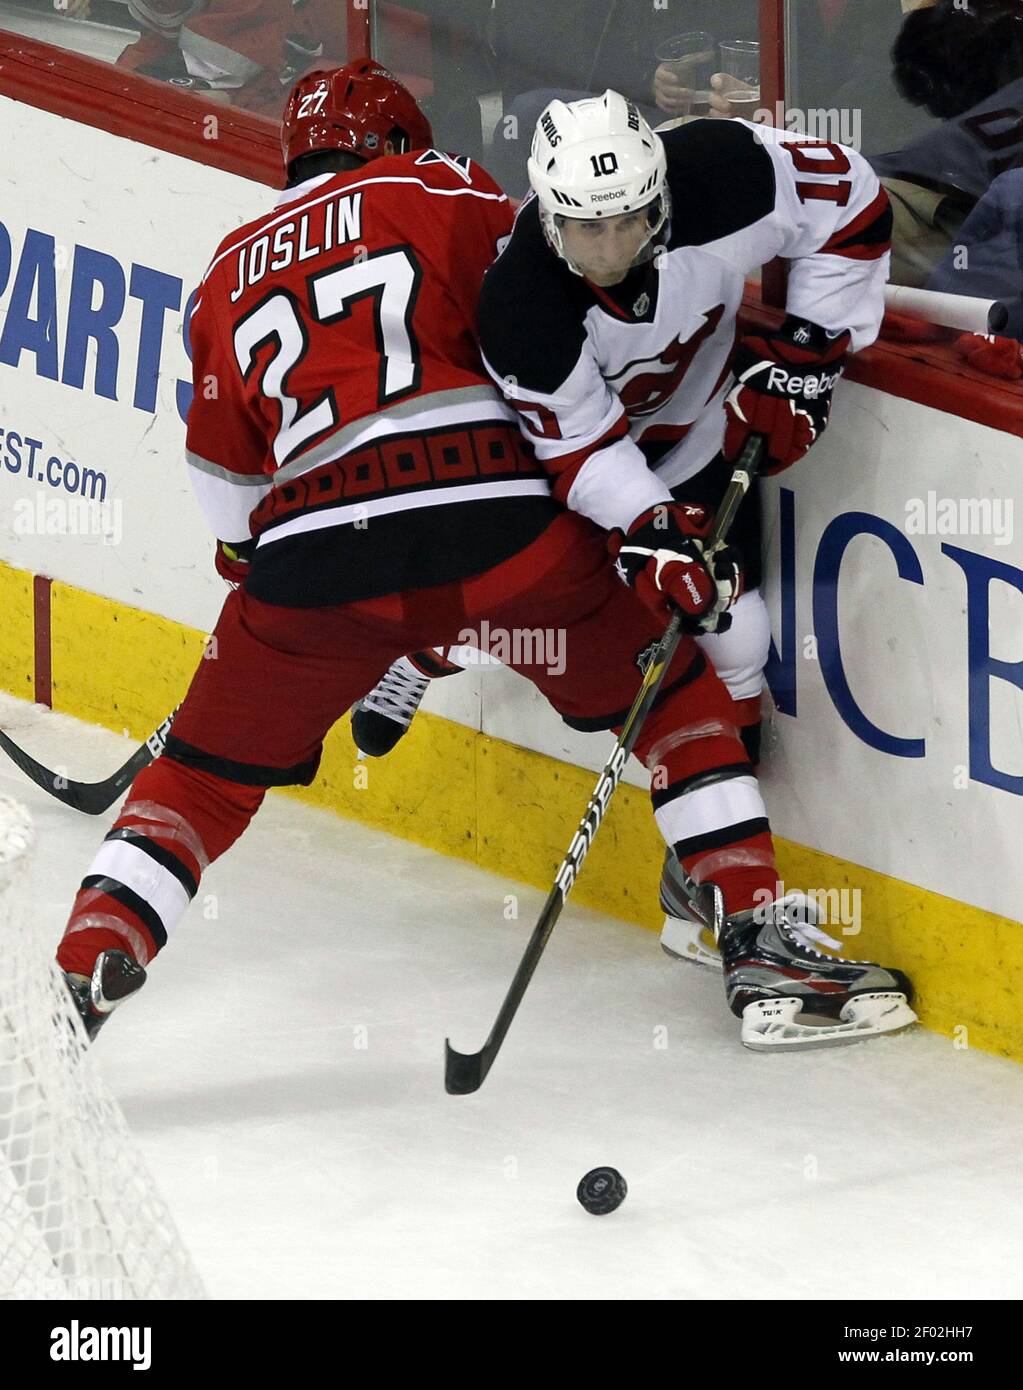 The Carolina Hurricanes' Derek Joslin (27) battles the New Jersey Devils'  Peter Harrold (10) for the puck during the third period at the PNC Arena in  Raleigh, North Carolina, Saturday, March 31,